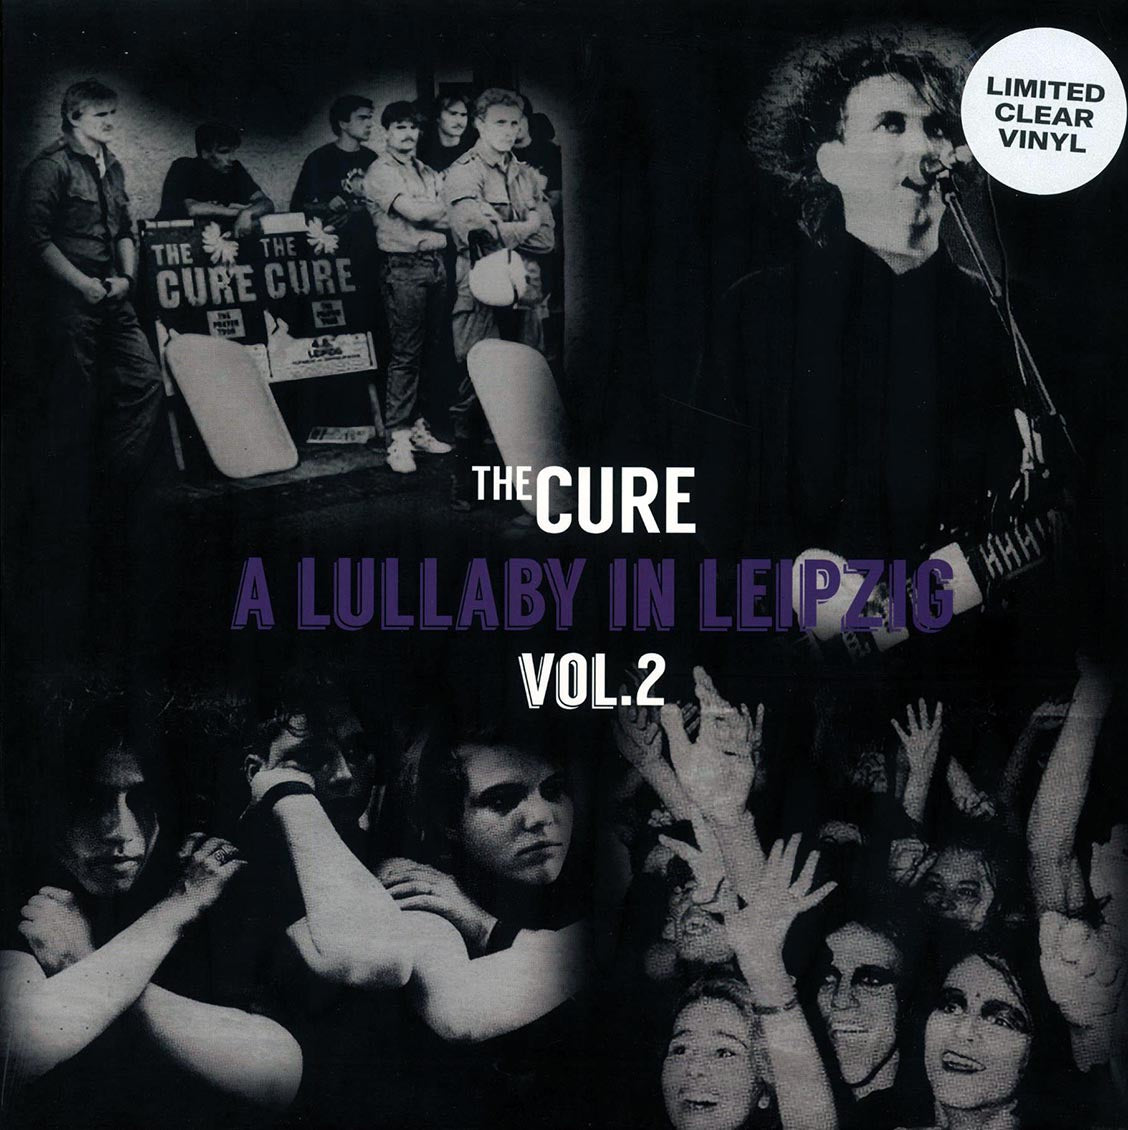 The Cure - A Lullaby In Leipzig Volume 2 (ltd. 500 copies made) (clear vinyl) - Vinyl LP